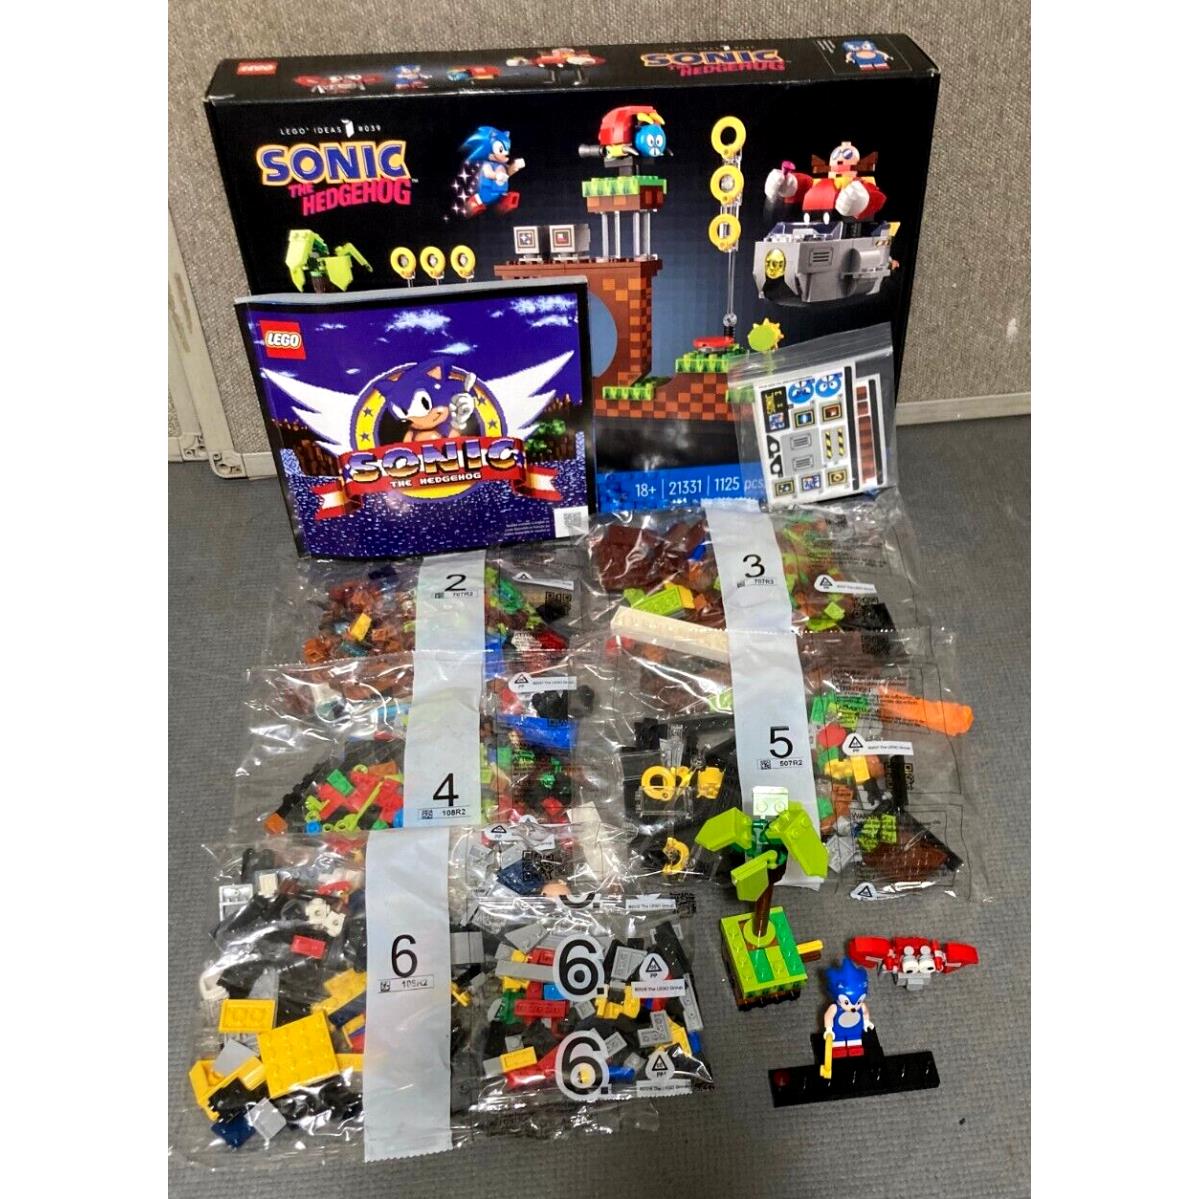 Lego Ideas: 21331 Sonic Hedgehog Building Toy 1st Bag Opened Complete